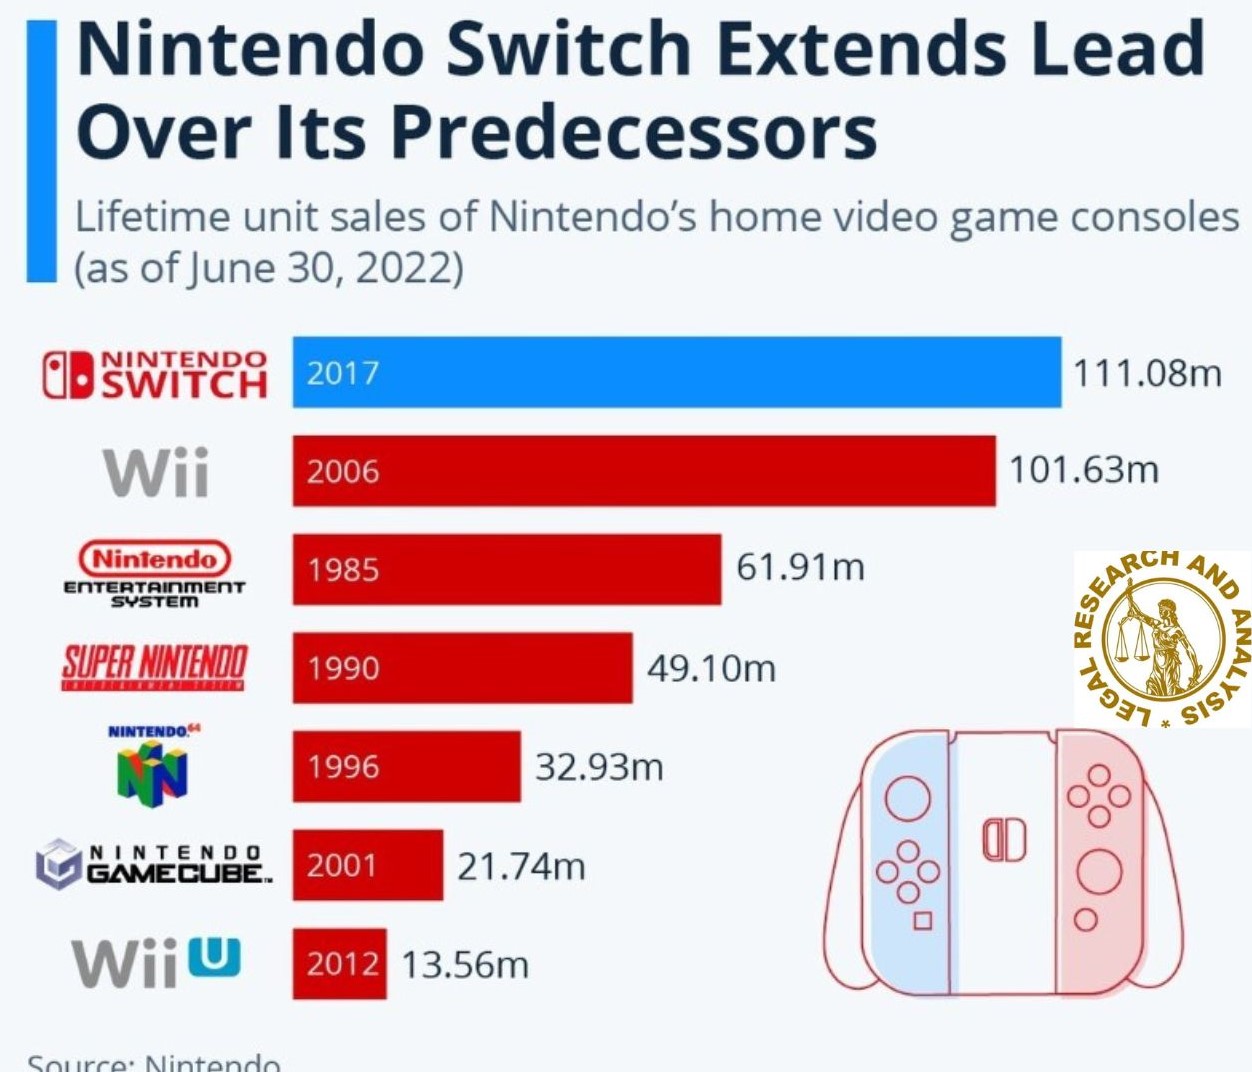 Nintendo Switch Extends Lead Over its Predecessors